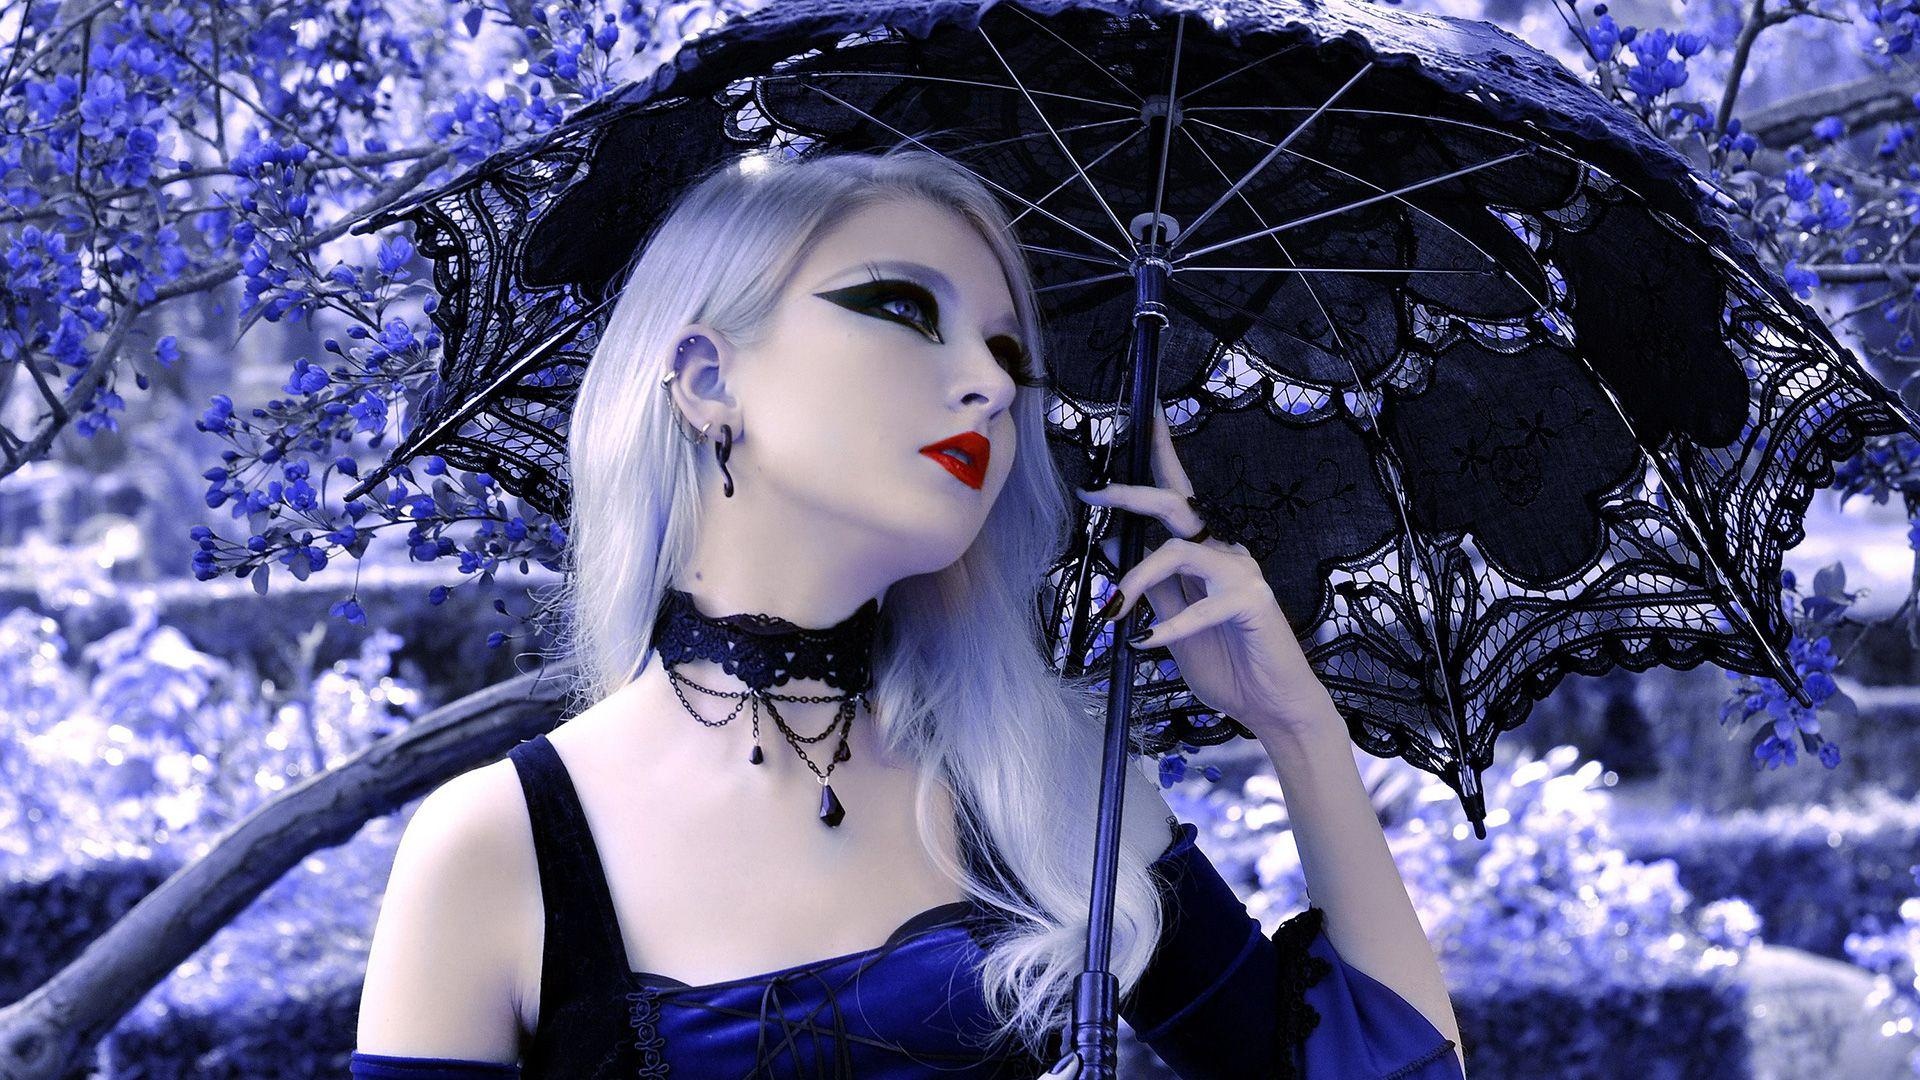 Goth Girl: Gothic beauty, Dramatic look, Victorian-inspired goth style. 1920x1080 Full HD Wallpaper.